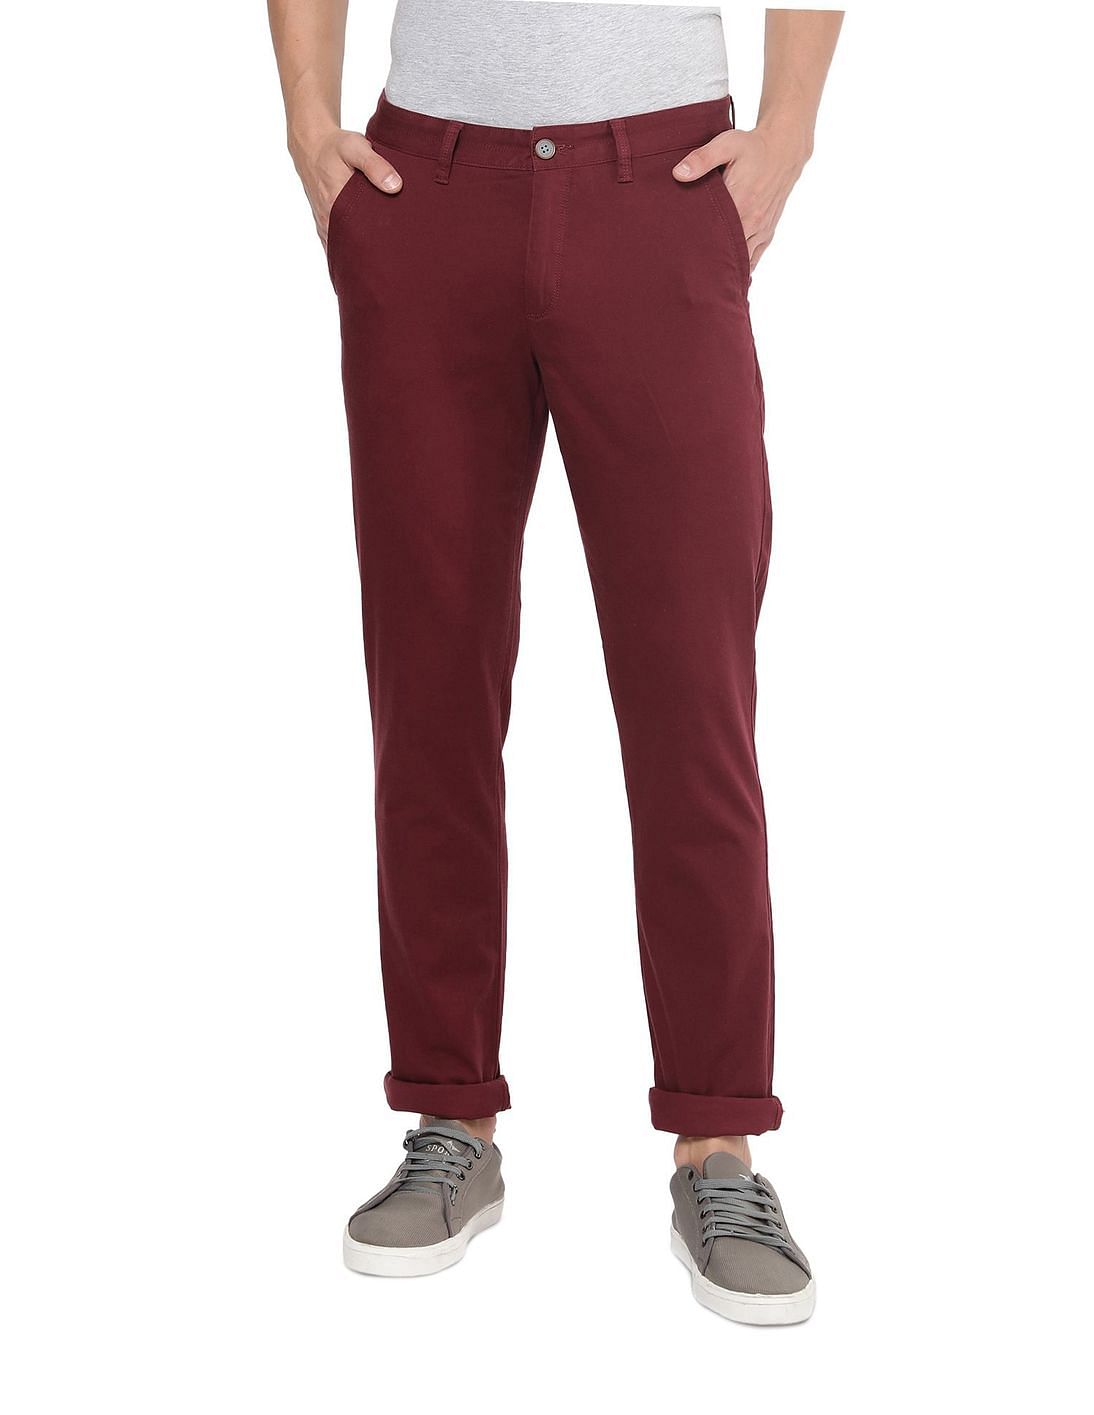 Buy AD by Arvind Modern Slim Fit Solid Chinos - NNNOW.com